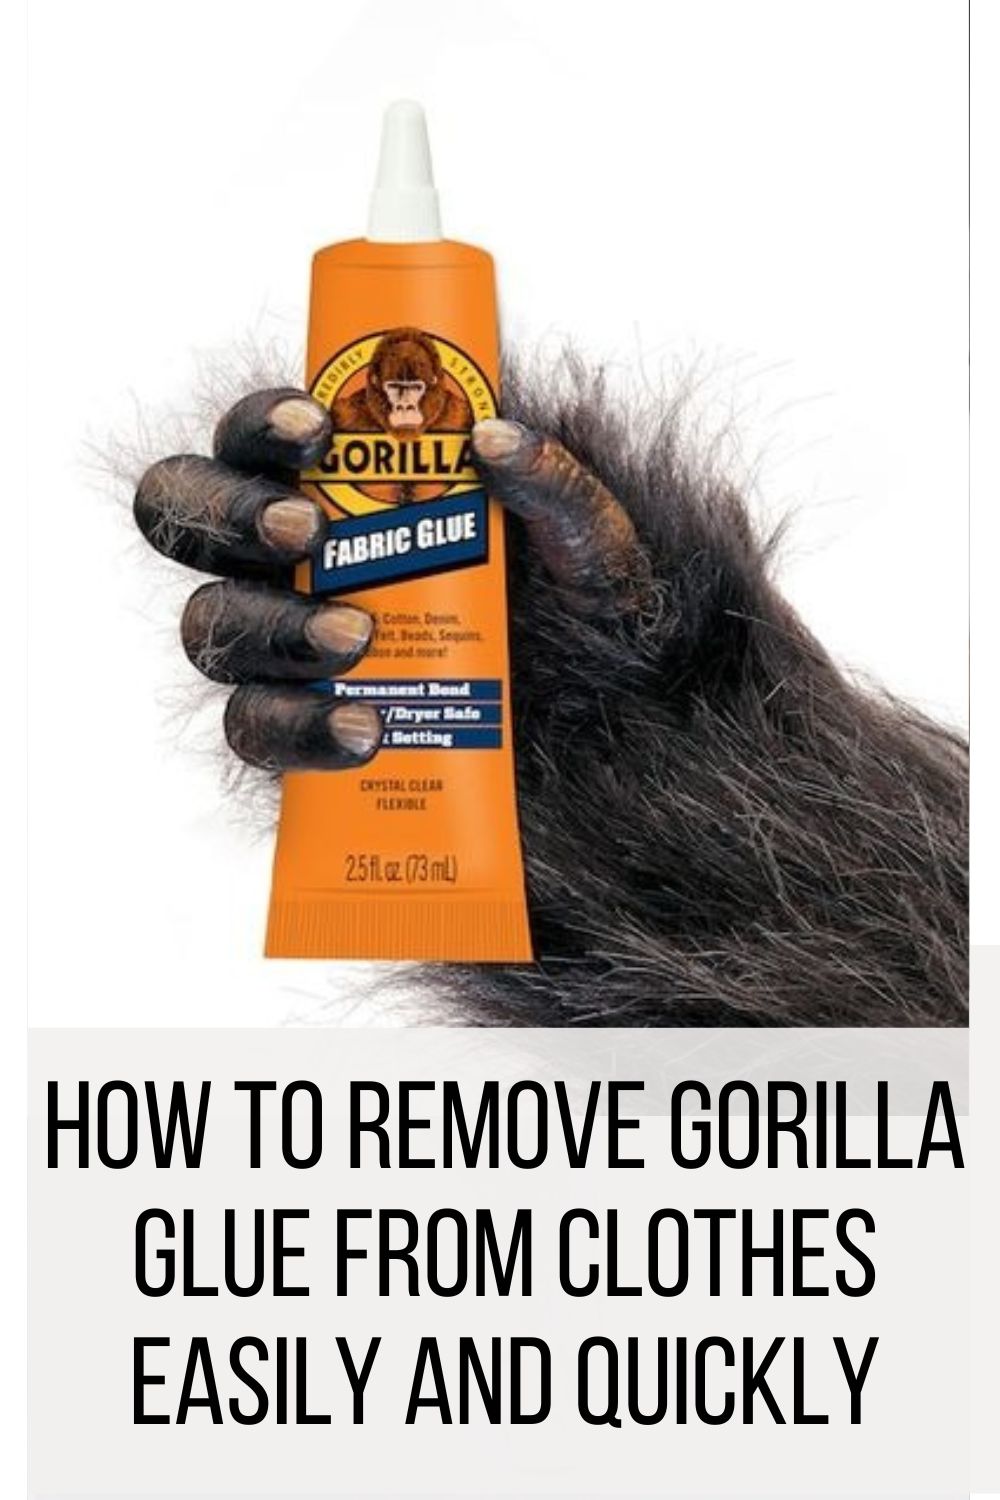 How To Remove Gorilla Glue From Clothes Easily And Quickly